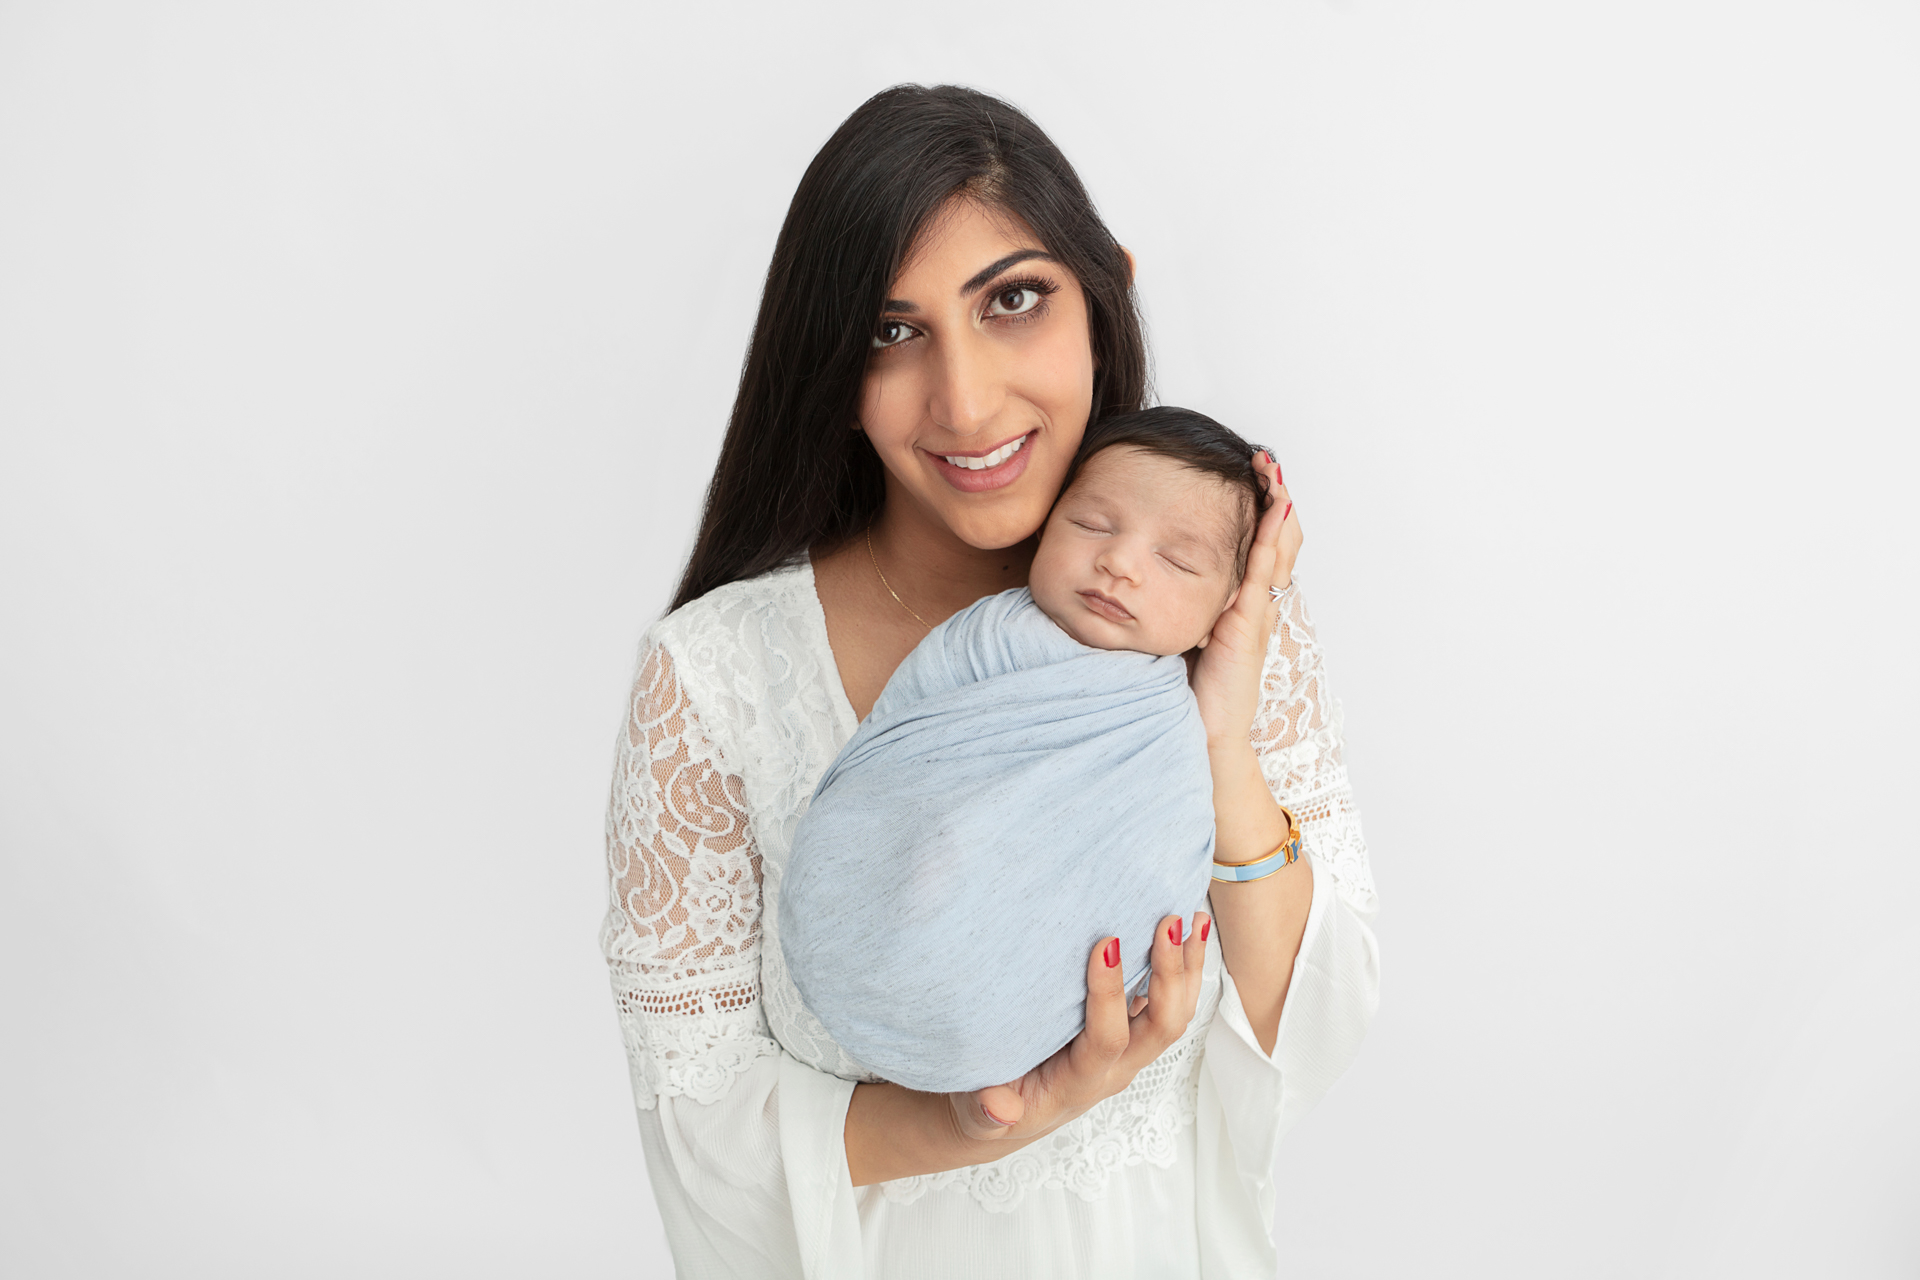 new mom with long dark hair and a white lace dress, holding her son who is swaddled in light blue